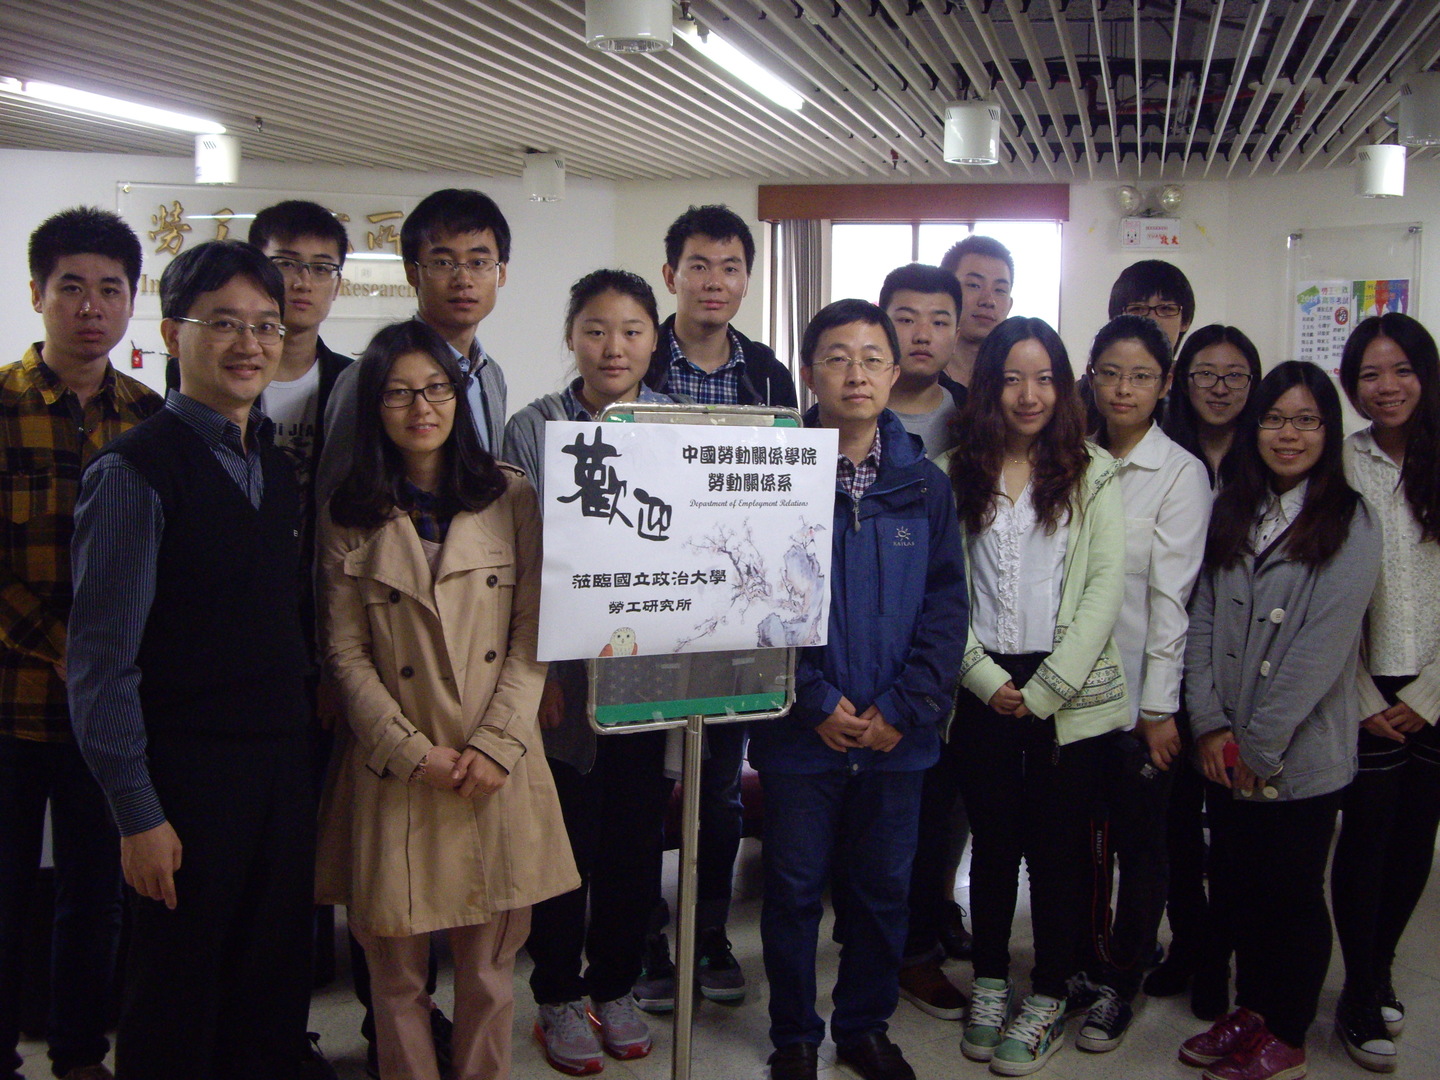 China Institute of Industrial Relations Visited (2014.12.04)